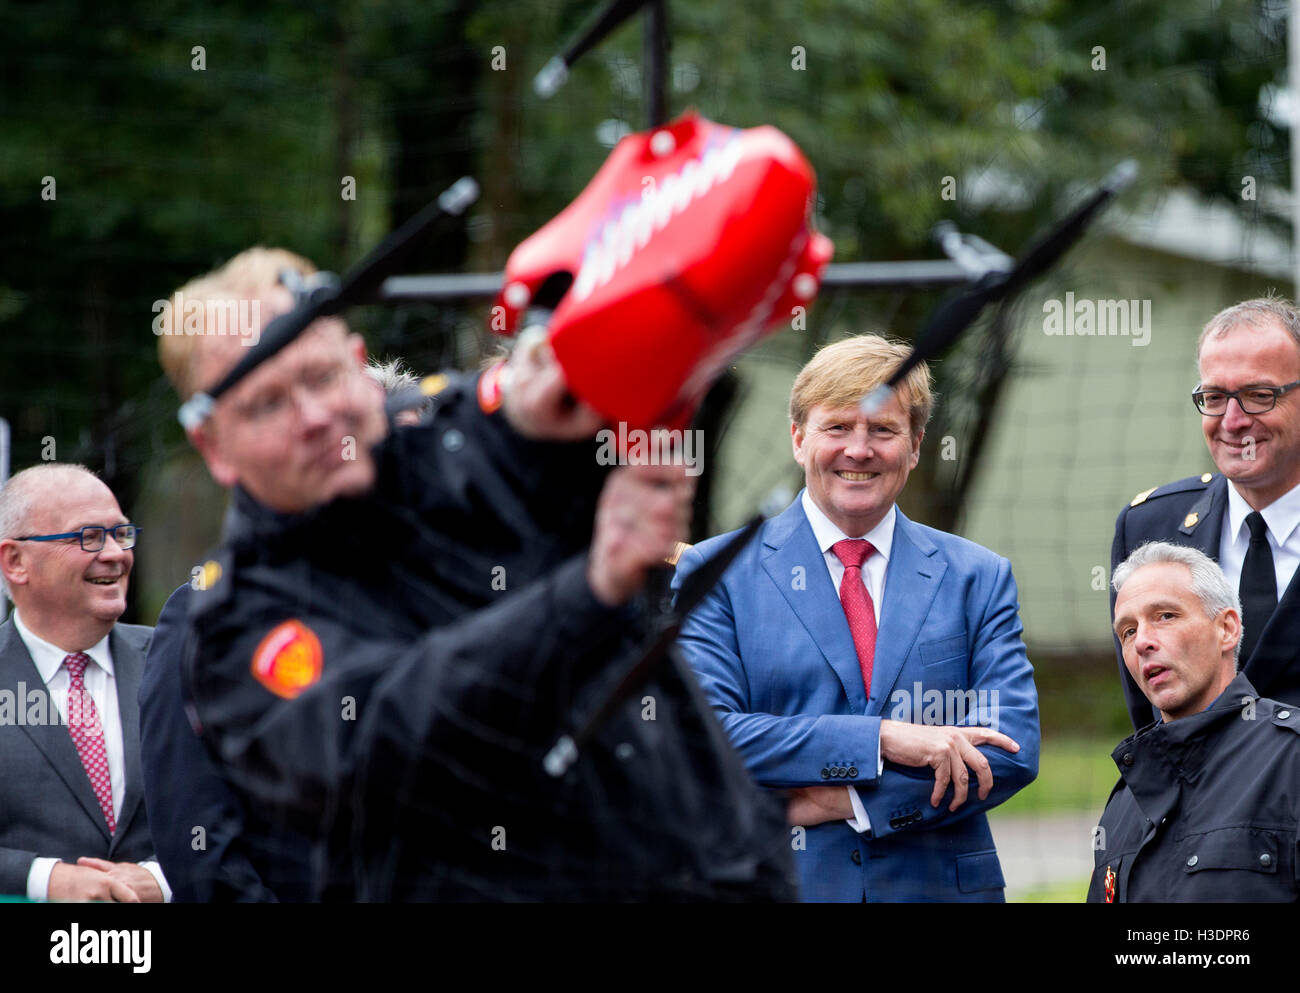 Deurningen, The Netherlands. 6th Oct, 2016. King Willem-Alexander of The Netherlands (3rd R) visits the Twente Safety Campus in Deurningen, The Netherlands, 6 October 2016. At the campus school children and the elderly how to react in dangerous situations. Photo: Patrick van Katwijk//POINT DE VUE OUT/dpa/Alamy Live News Stock Photo